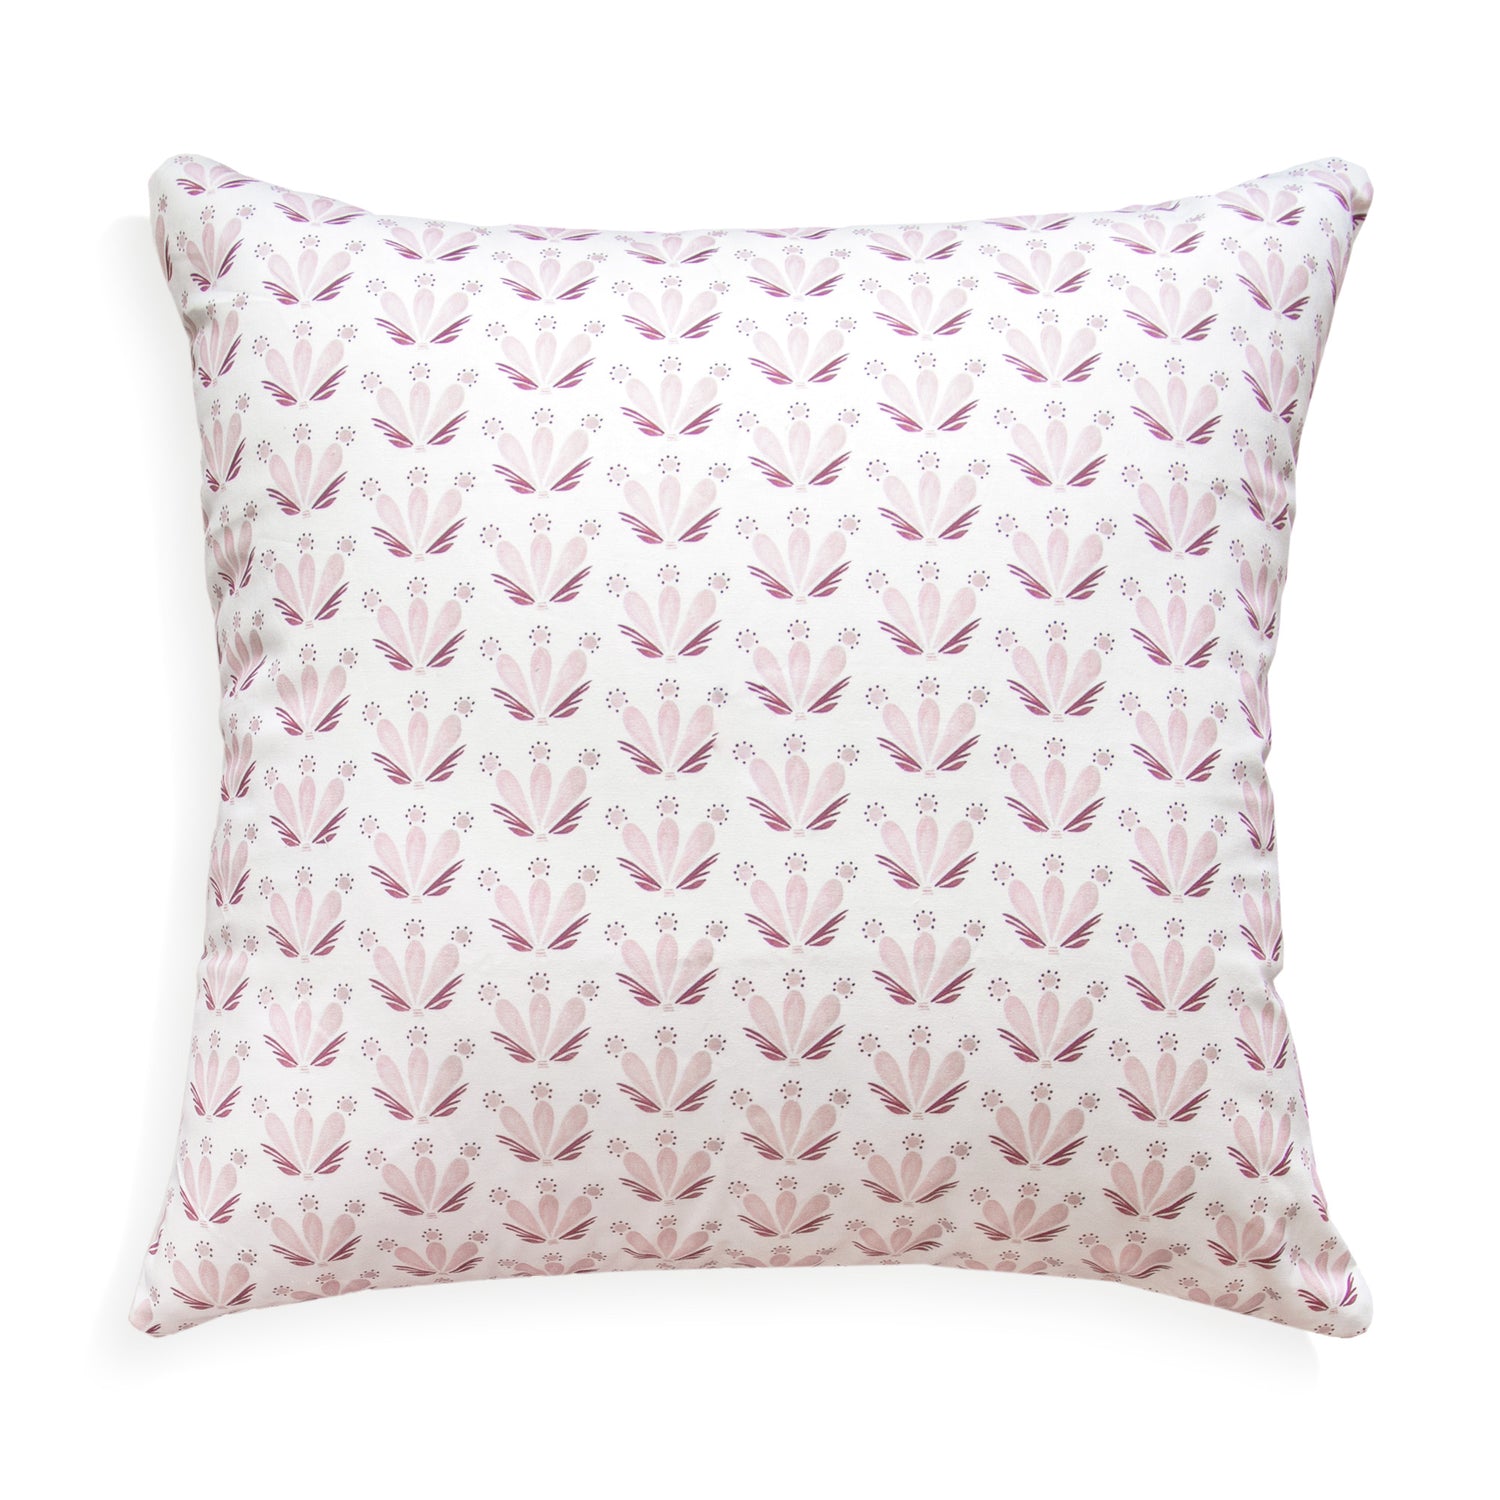 Bungalow Rose Embroidered Cotton Throw Pillow